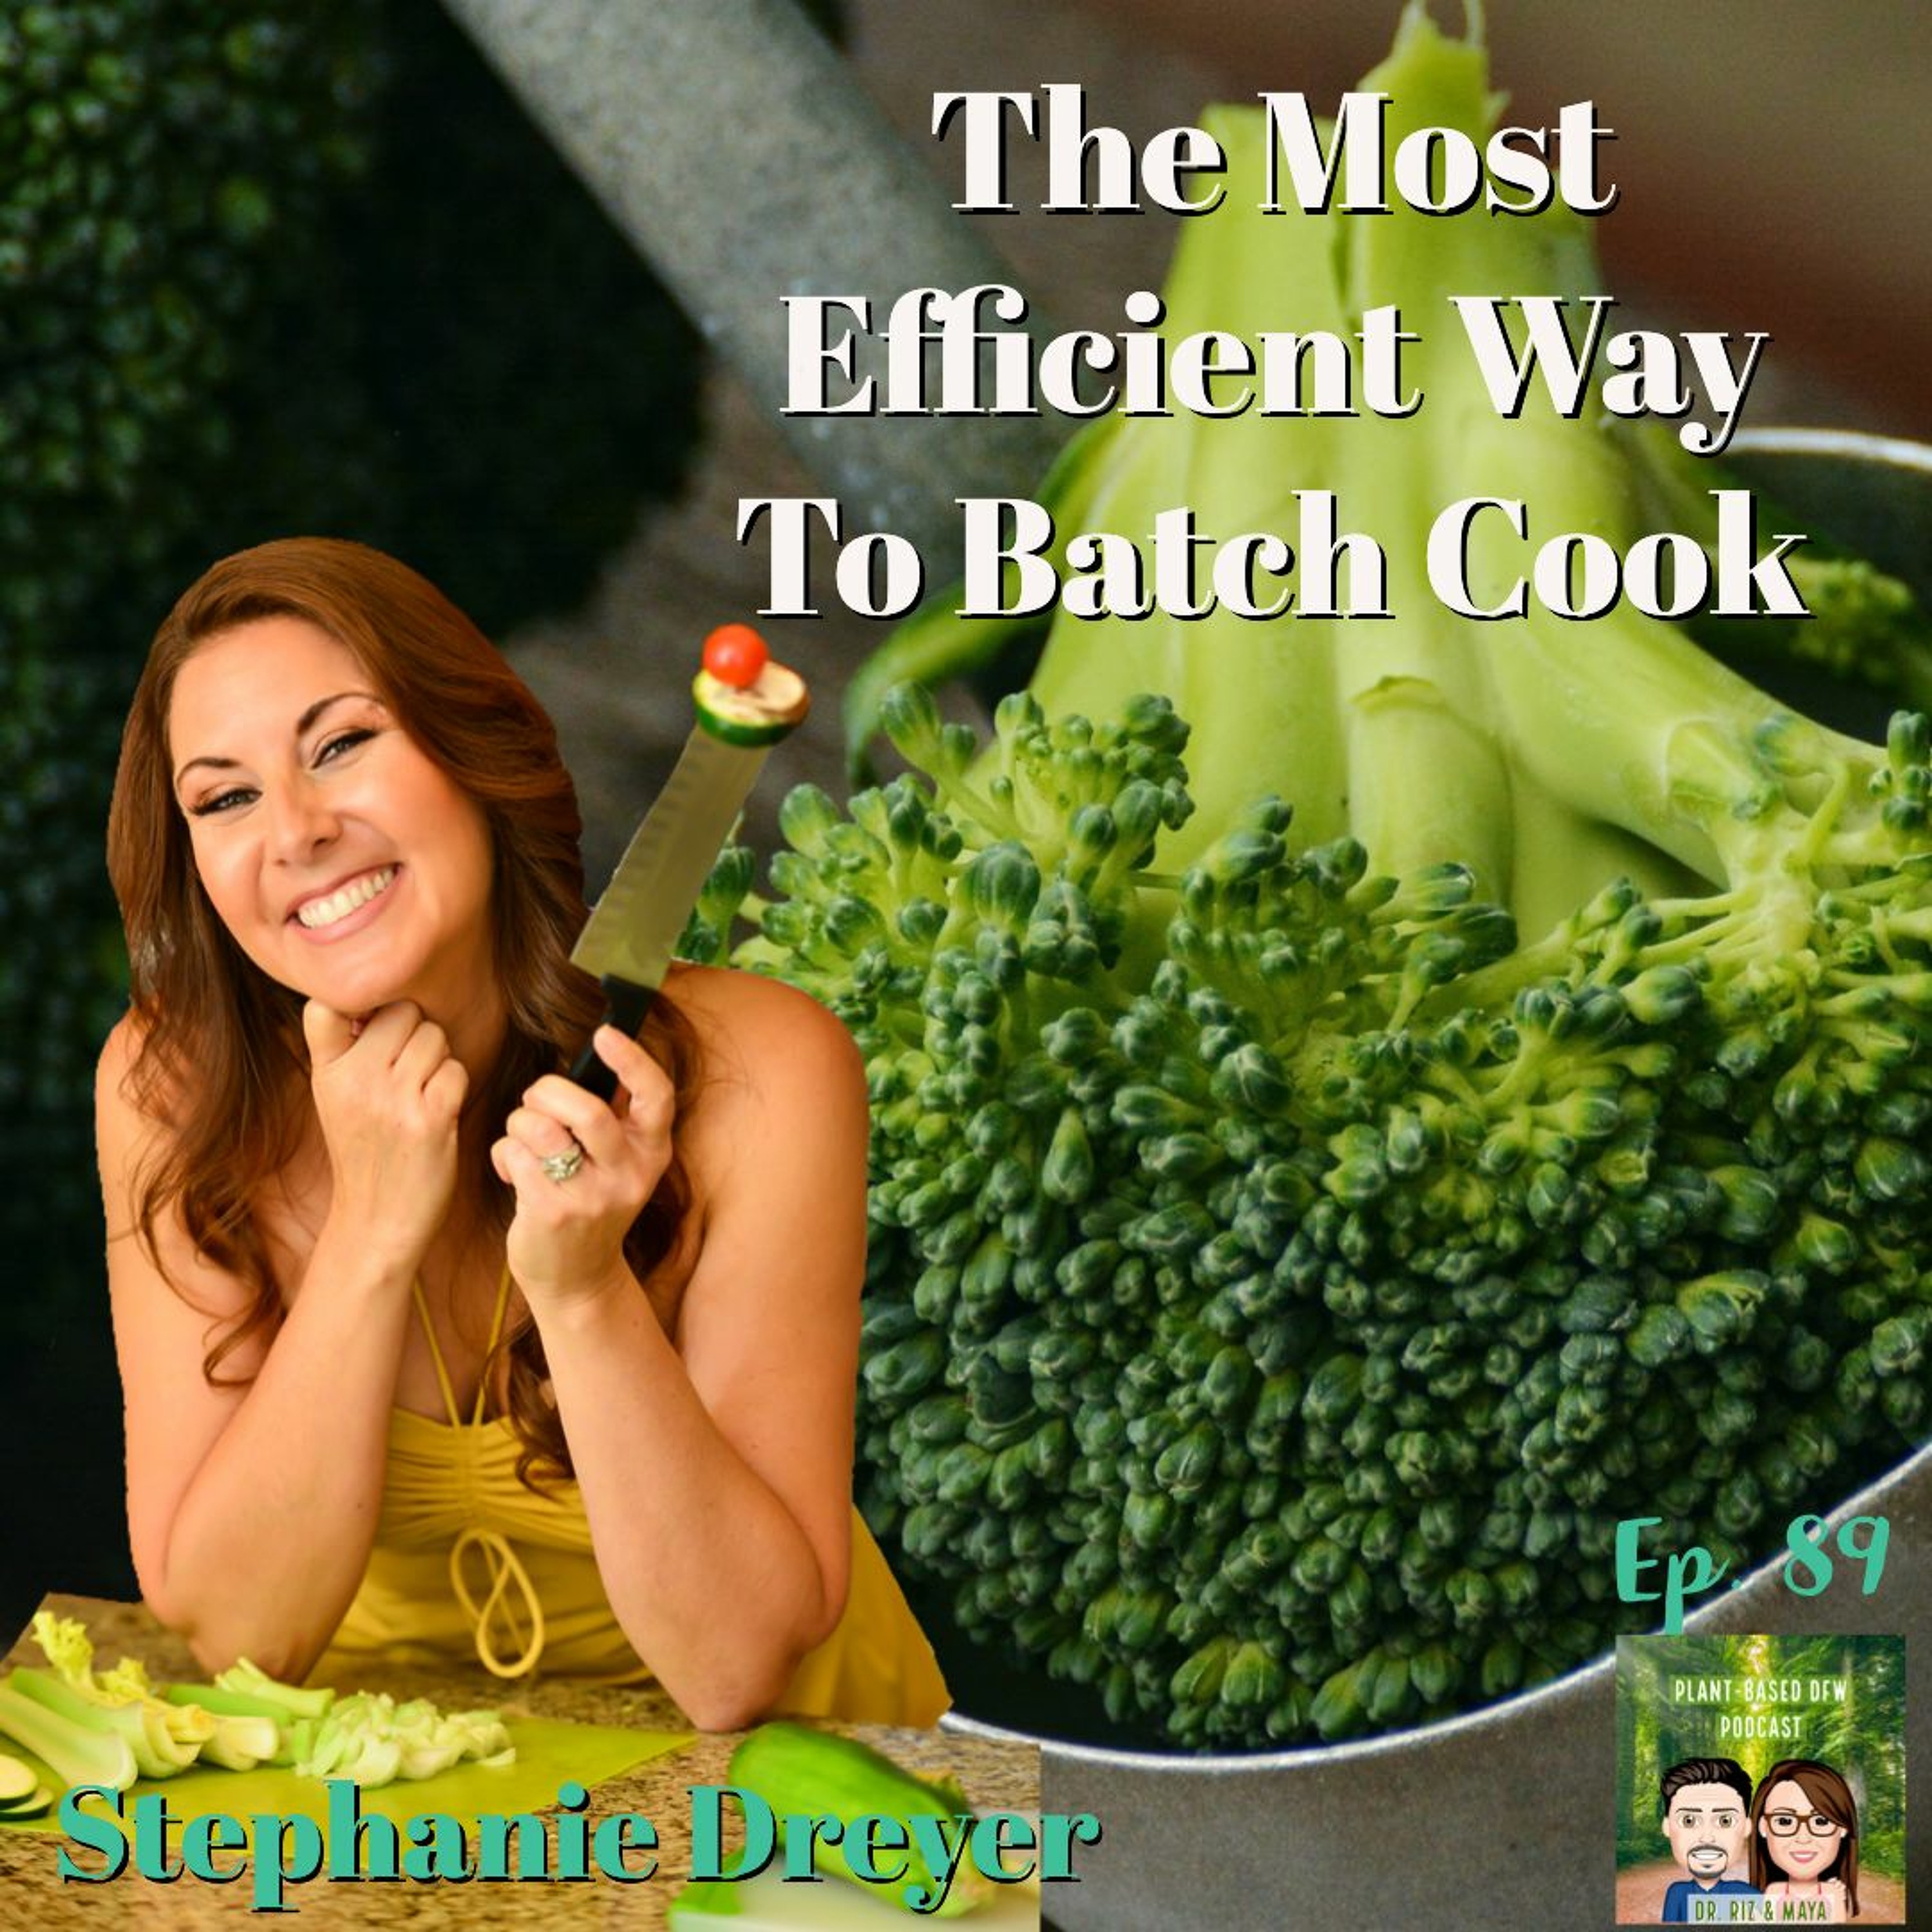 89: How to Batch Cook Effectively | Easy Meal Prep Ideas & Healthy Recipes Image